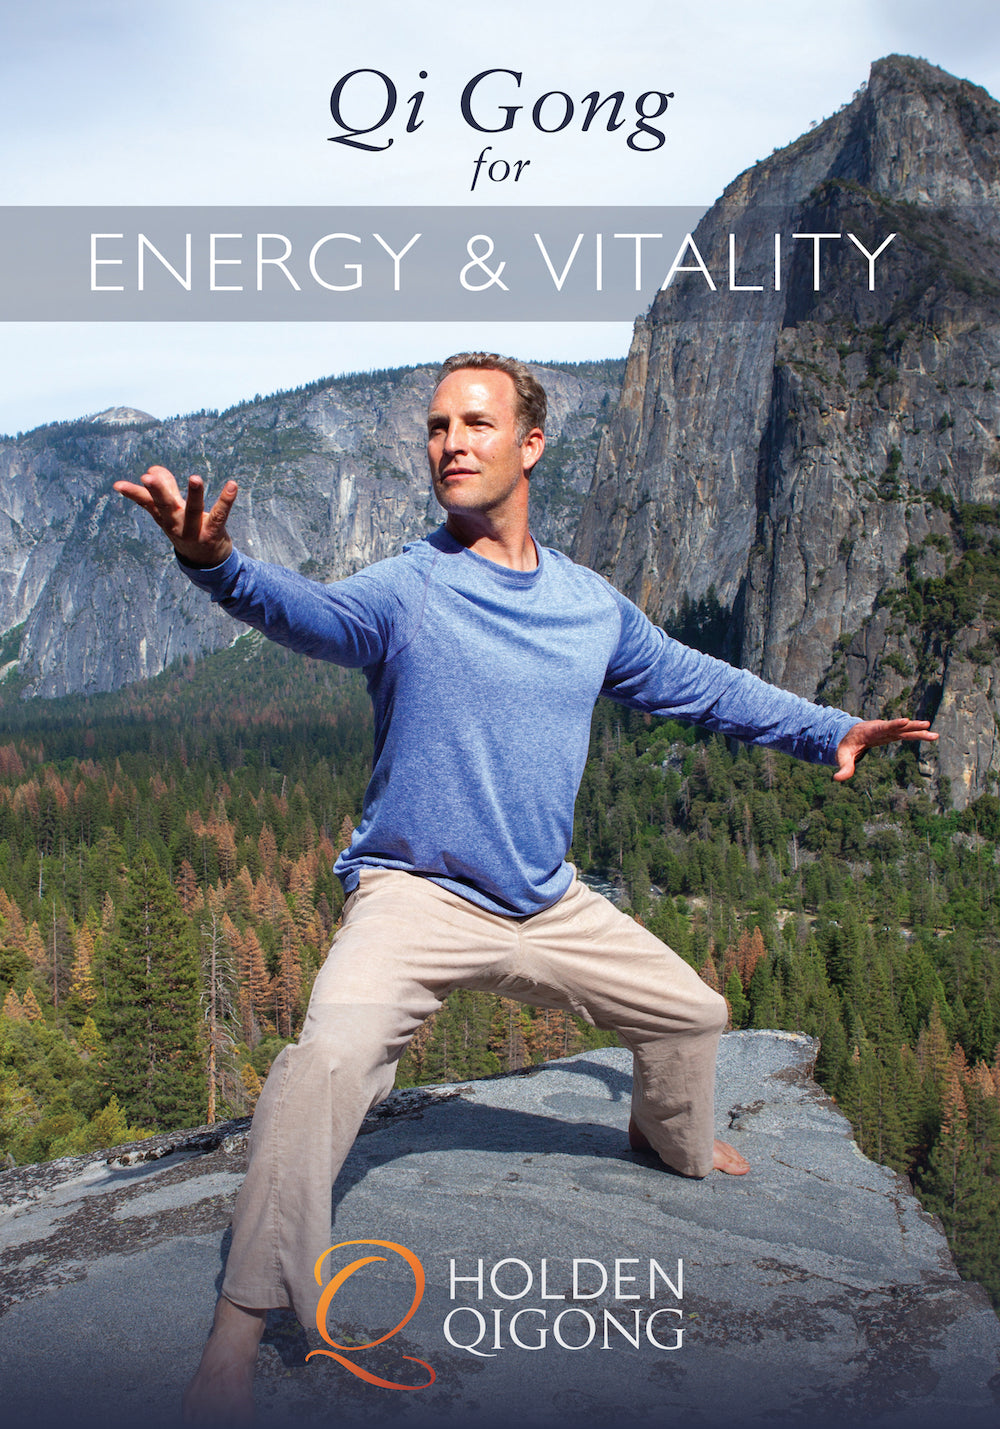 Qi Gong for Energy and Vitality DVD with Lee Holden - Budovideos Inc